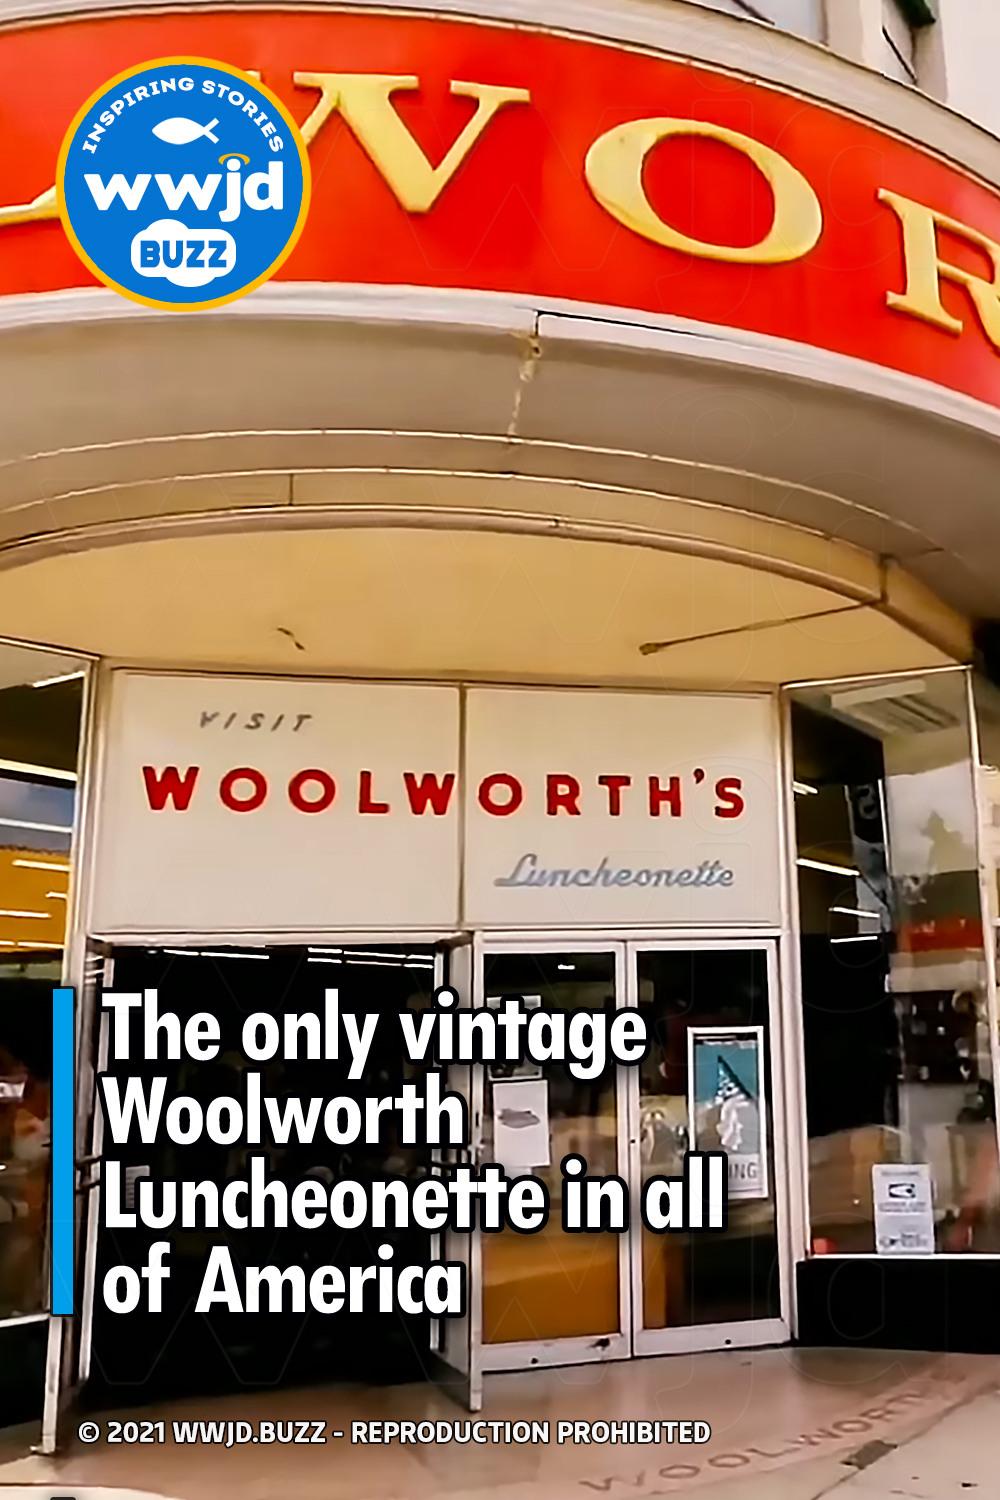 The only vintage Woolworth Luncheonette in all of America